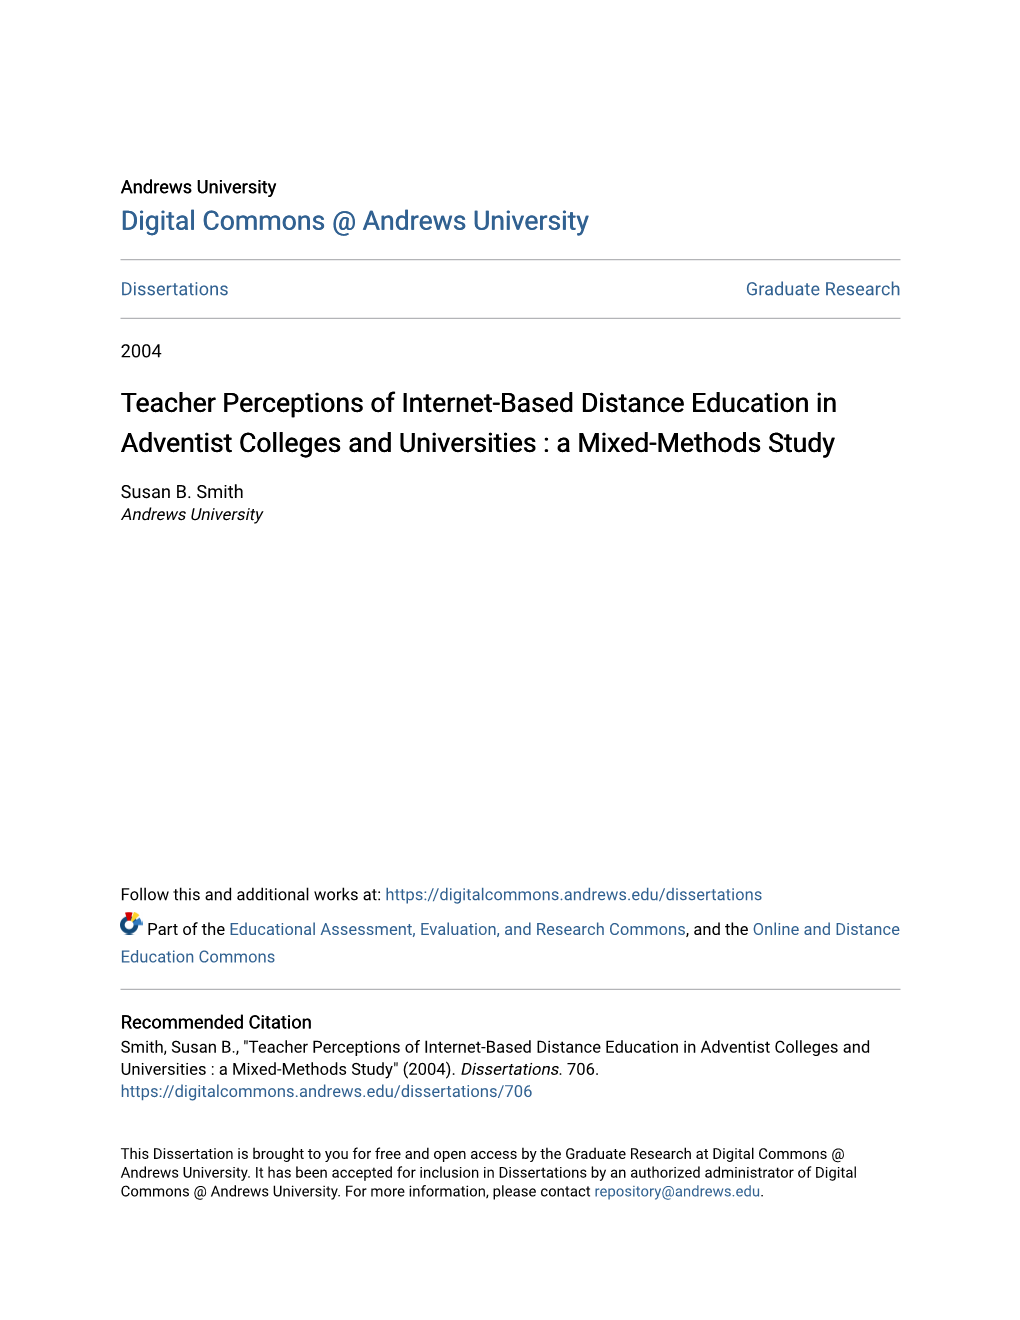 Teacher Perceptions of Internet-Based Distance Education in Adventist Colleges and Universities : a Mixed-Methods Study